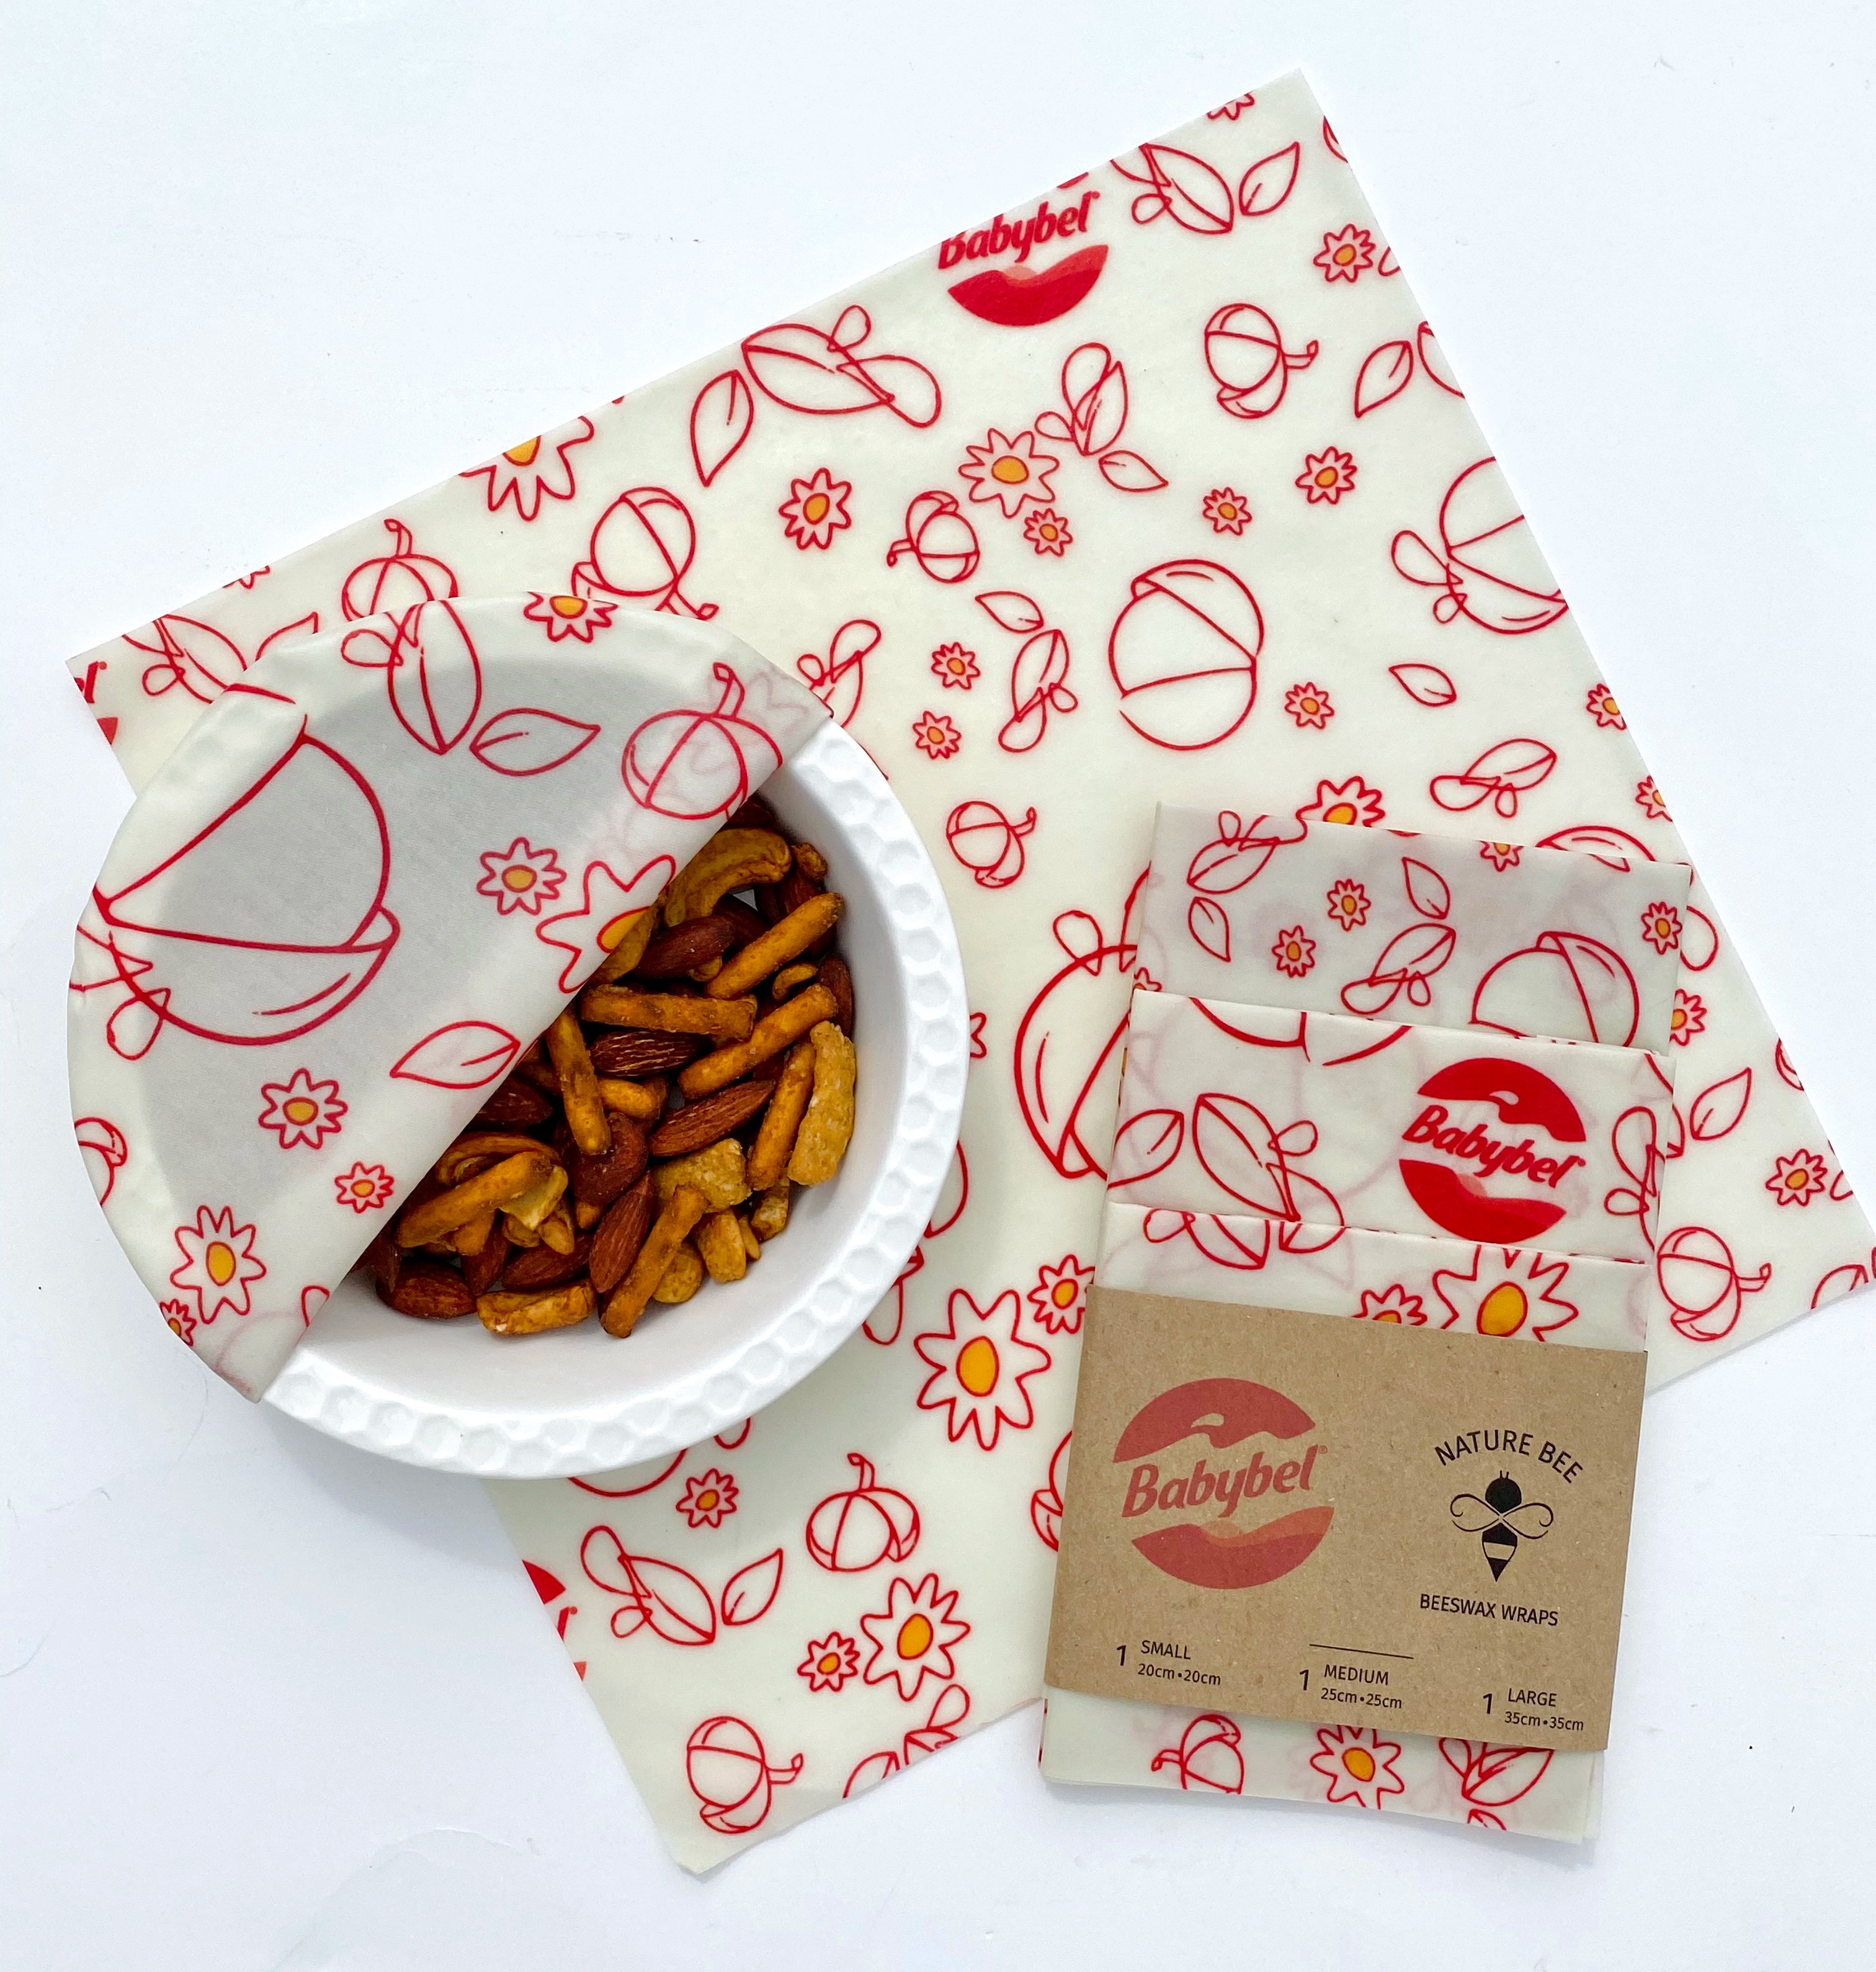 Babybel custom beeswax wraps for a corporate cheese company. One customized beeswax wraps with a white background and red icons and drawings include logos and artwork. Flat wrap on white counter with a bowl of pretzels wrapped in a beeswax wrap and a trio of three beeswax wraps packaged with a co-branded belly band. The perfect eco friendly way to spread the word about your brand. 